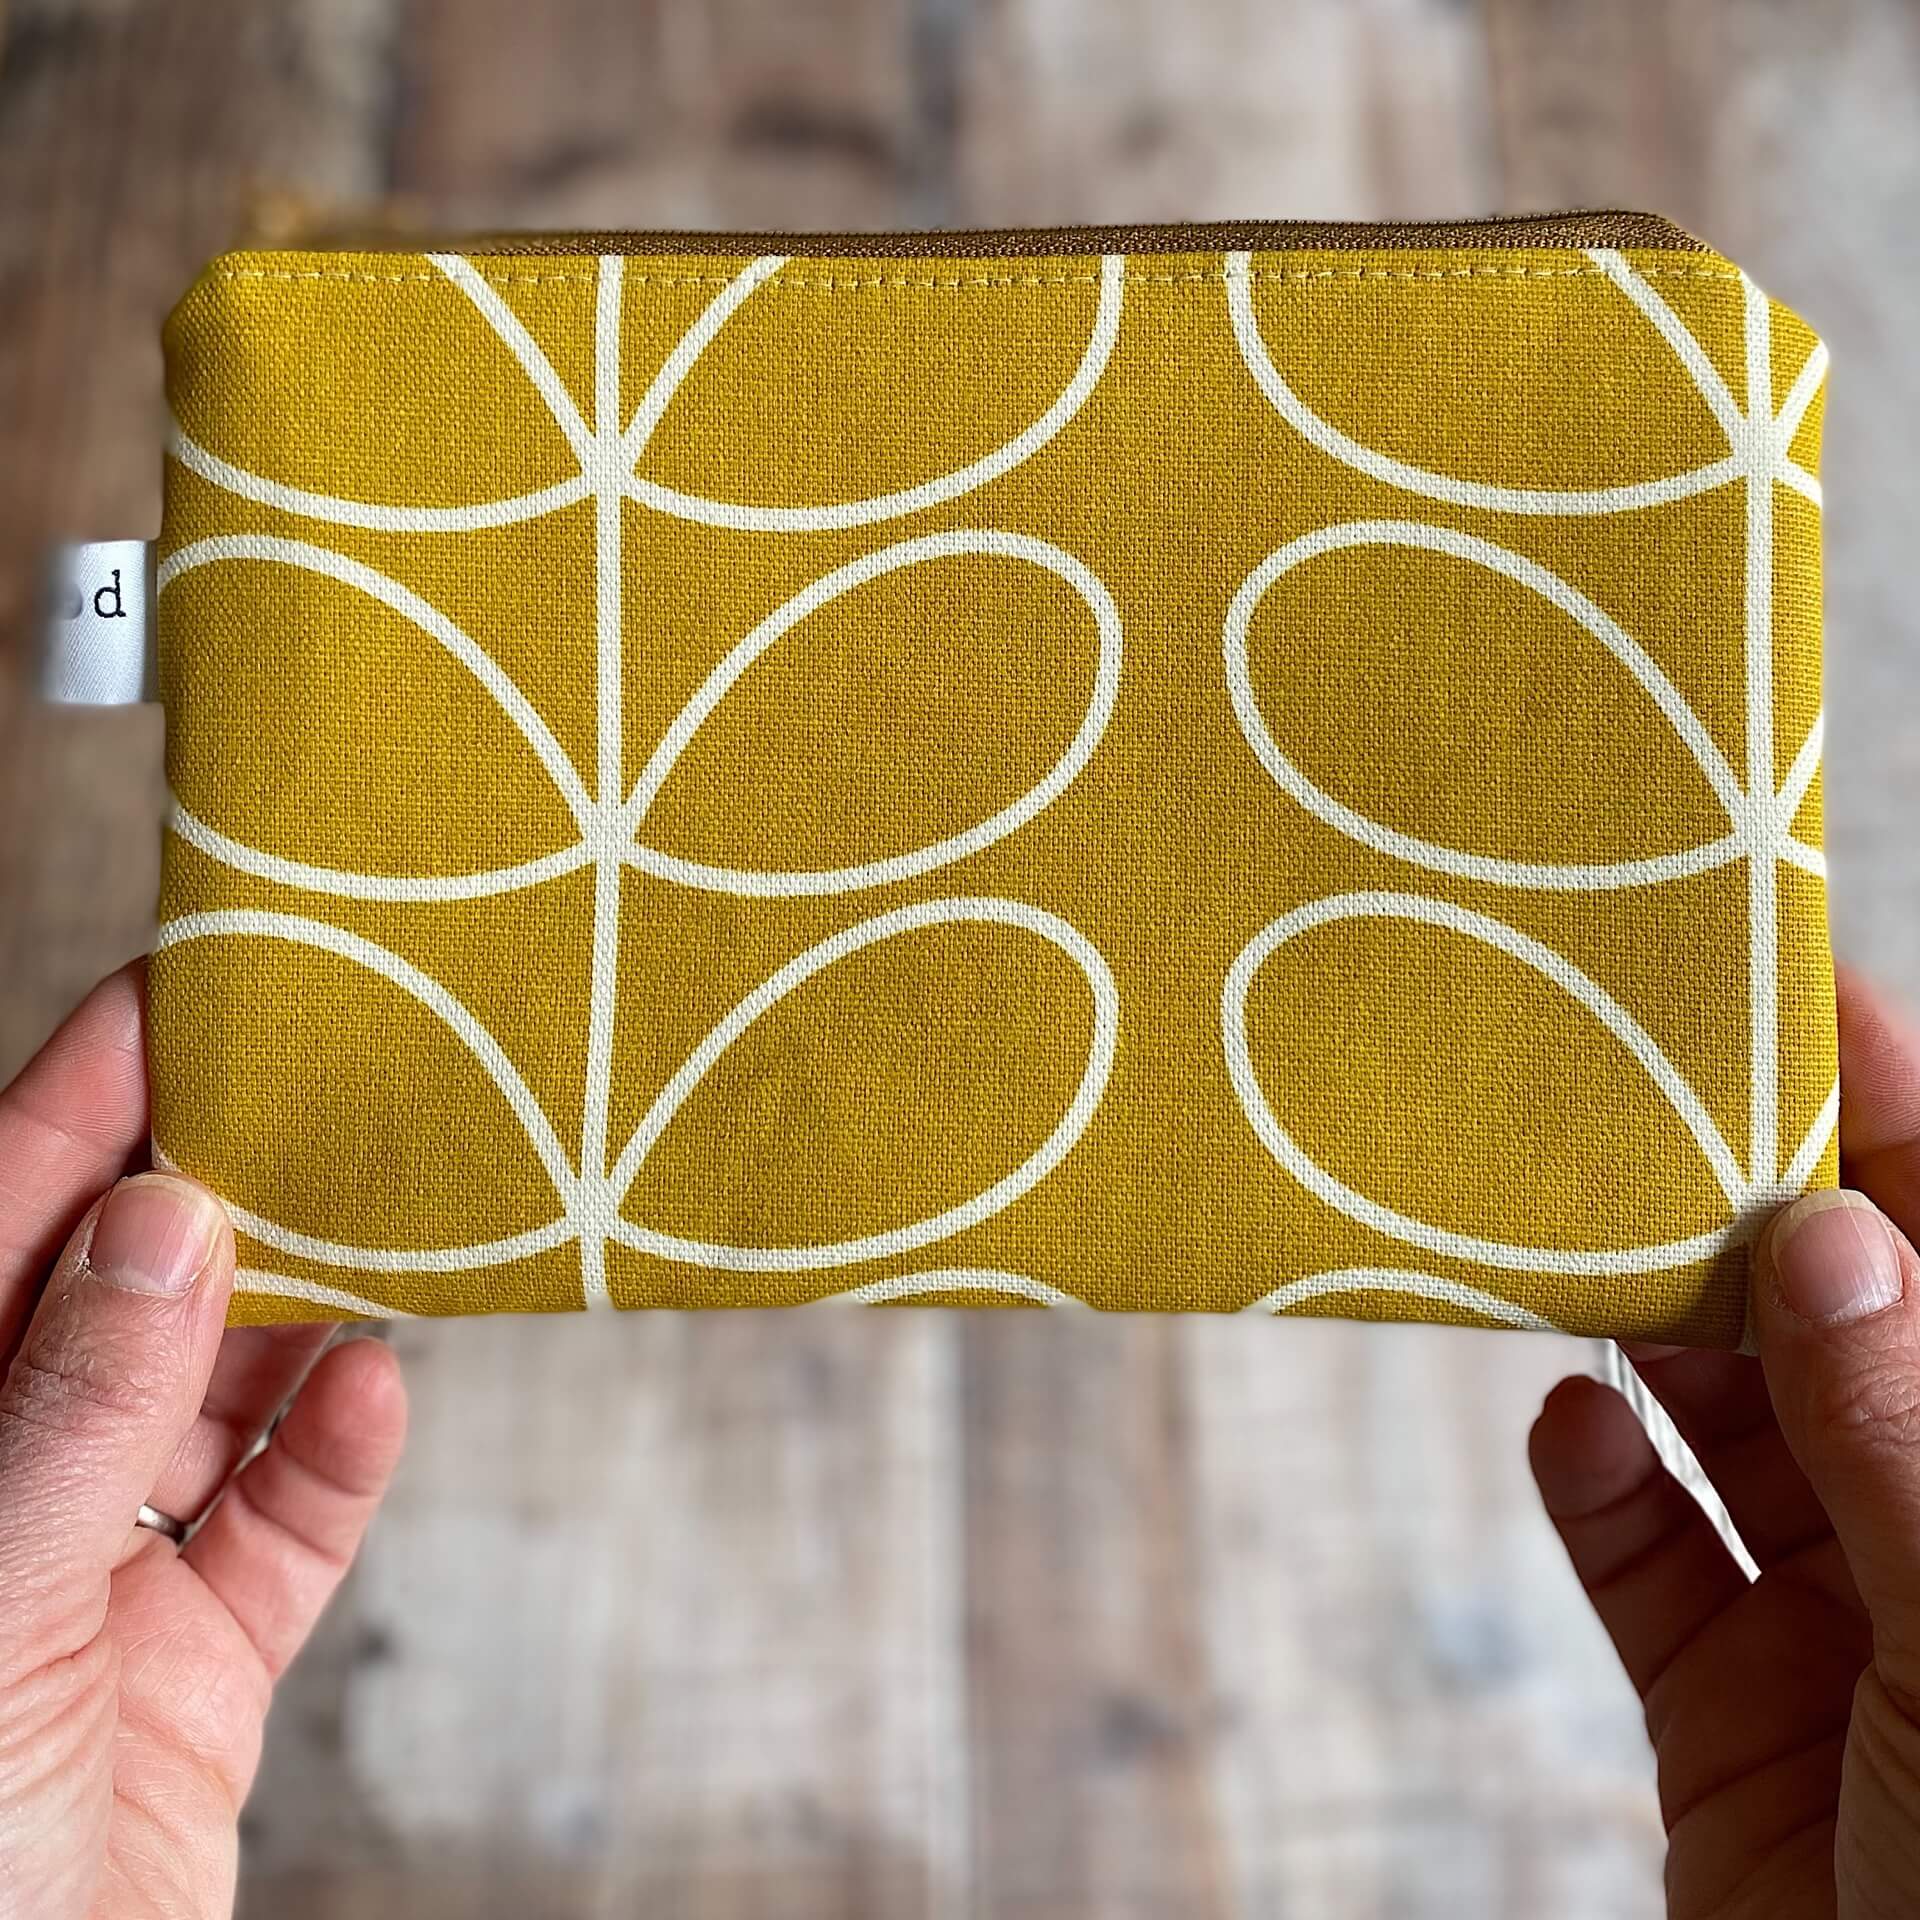 A cheerful yellow notions pouch is held up in front of a wooden table.